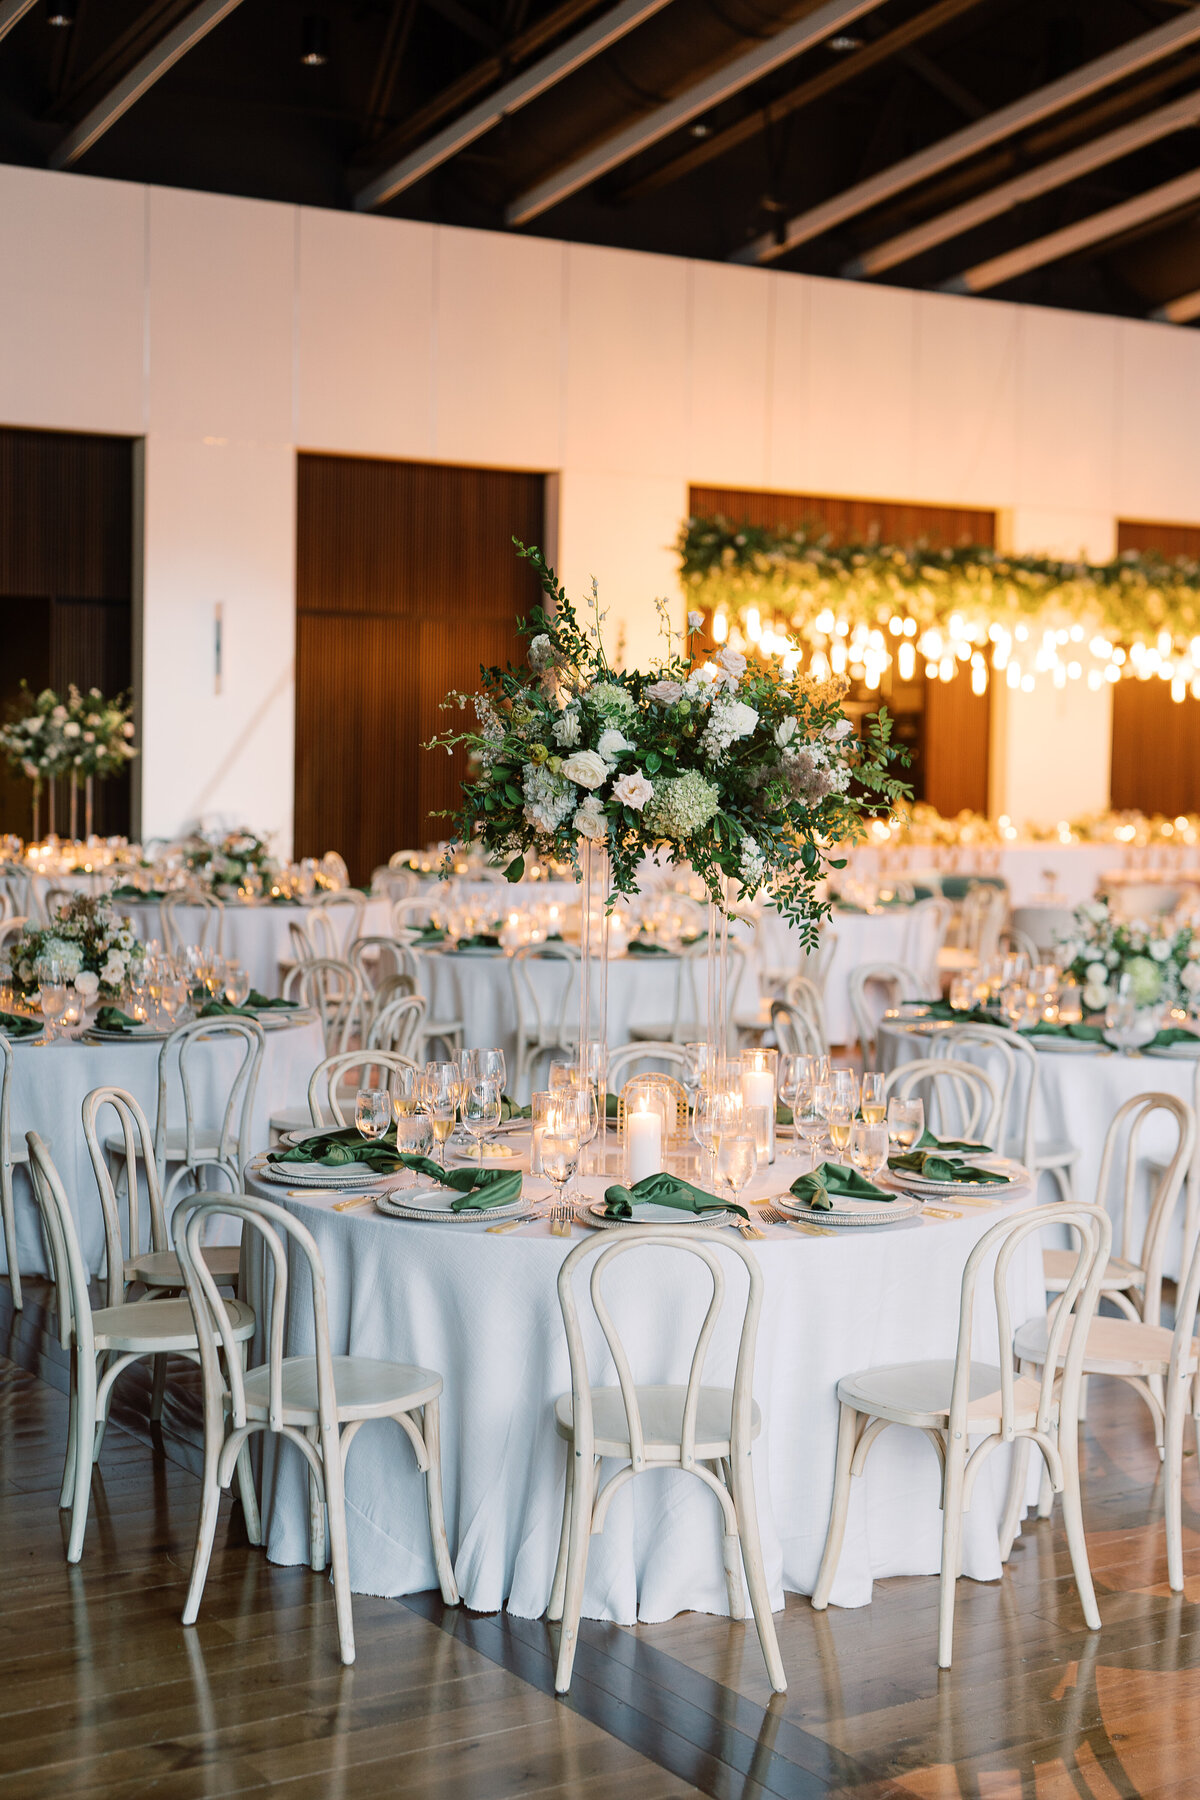 Elevated floral centerpieces for garden-inspired wedding in downtown Nashville. Classic white and green wedding with floral colors in cream, white, taupe, and champagne. Timeless pillar and votive candles in white accent this lush tall floral design. Design by Rosemary & Finch in Nashville, TN.